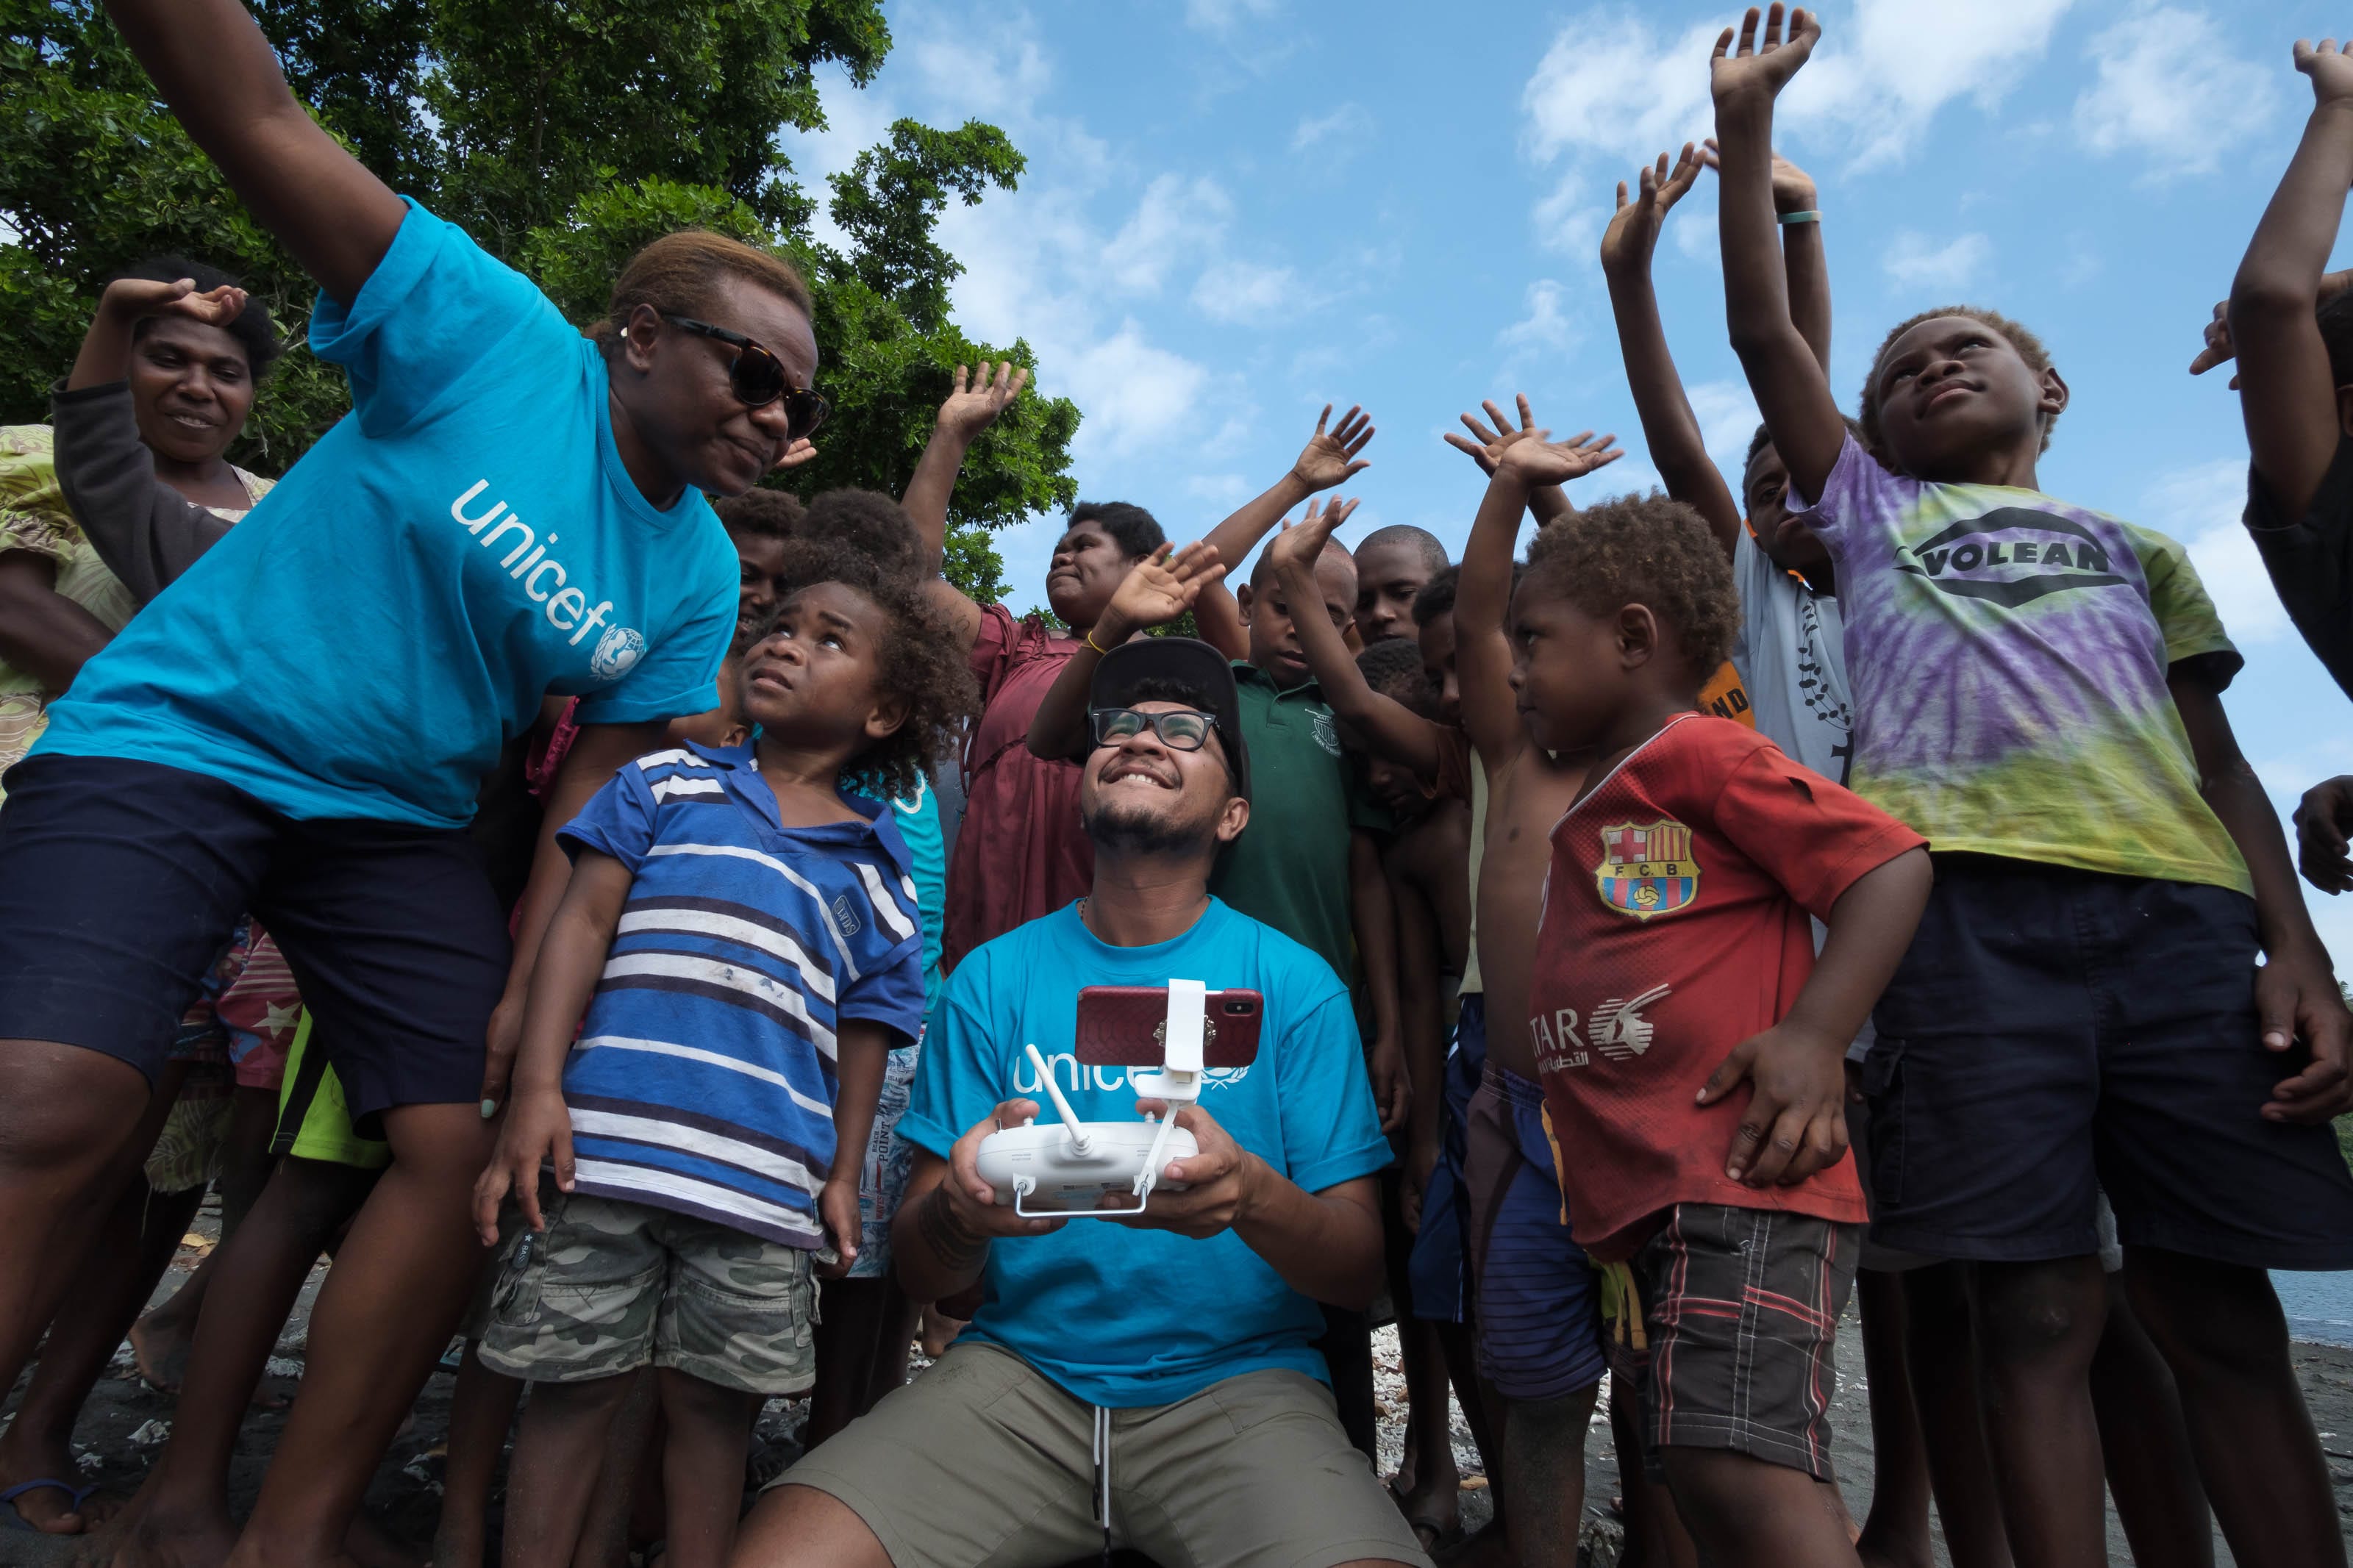 Jospeh Hing and Rebecca Olul introiducing the chgildren of Epi to the magic of drones and how they will be part of a world first drone delivery of vaccines trial to be held in Vanuatu. Credit: UNICEFPacific/2018/Chute